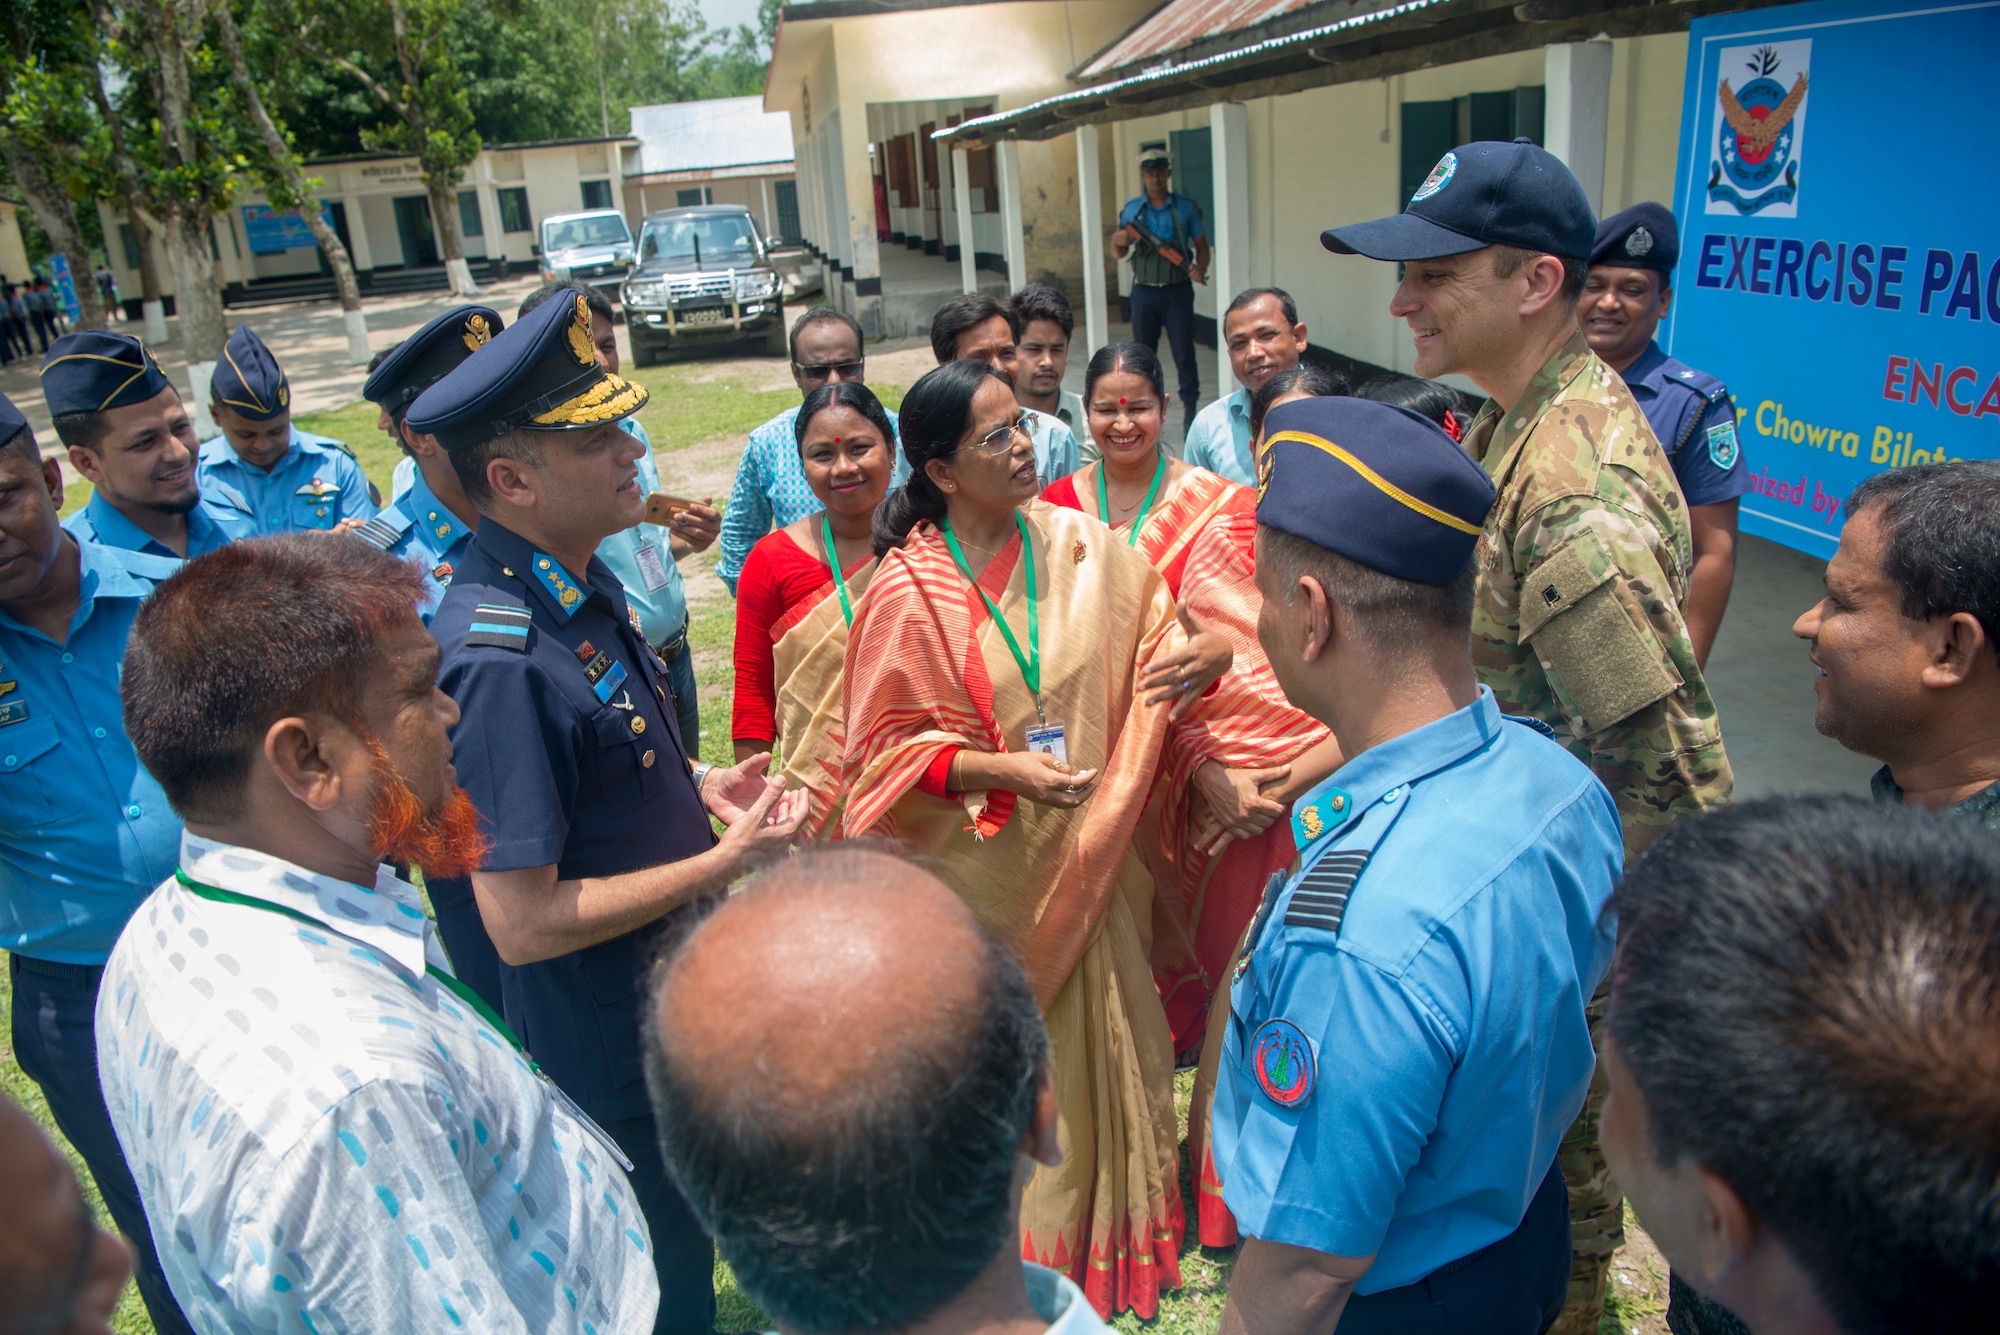 Bangladesh Air Force Maj. Gen. M. Nazoul Islam, center left, commanding officer of BAF Base Matiur Rahman, and U.S. Air Force Maj. Kristoffer Palmer, center right, Pacific Angel 19-1 mission commander, speak with teachers after celebrating the opening ceremony of Pacific Angel 19-1 at Kazir Chowra Bilateral High School in Lalmonirhat, Bangladesh, June 23, 2019. Pacific Angel 2019 is a joint and combined humanitarian assistance engagement, enhancing participating nations’ humanitarian assistance and disaster relief capabilities while providing beneficial services to people in need throughout South and Southeast Asia. (U.S. Air Force photo by 2nd Lt. Brigitte N. Brantley)